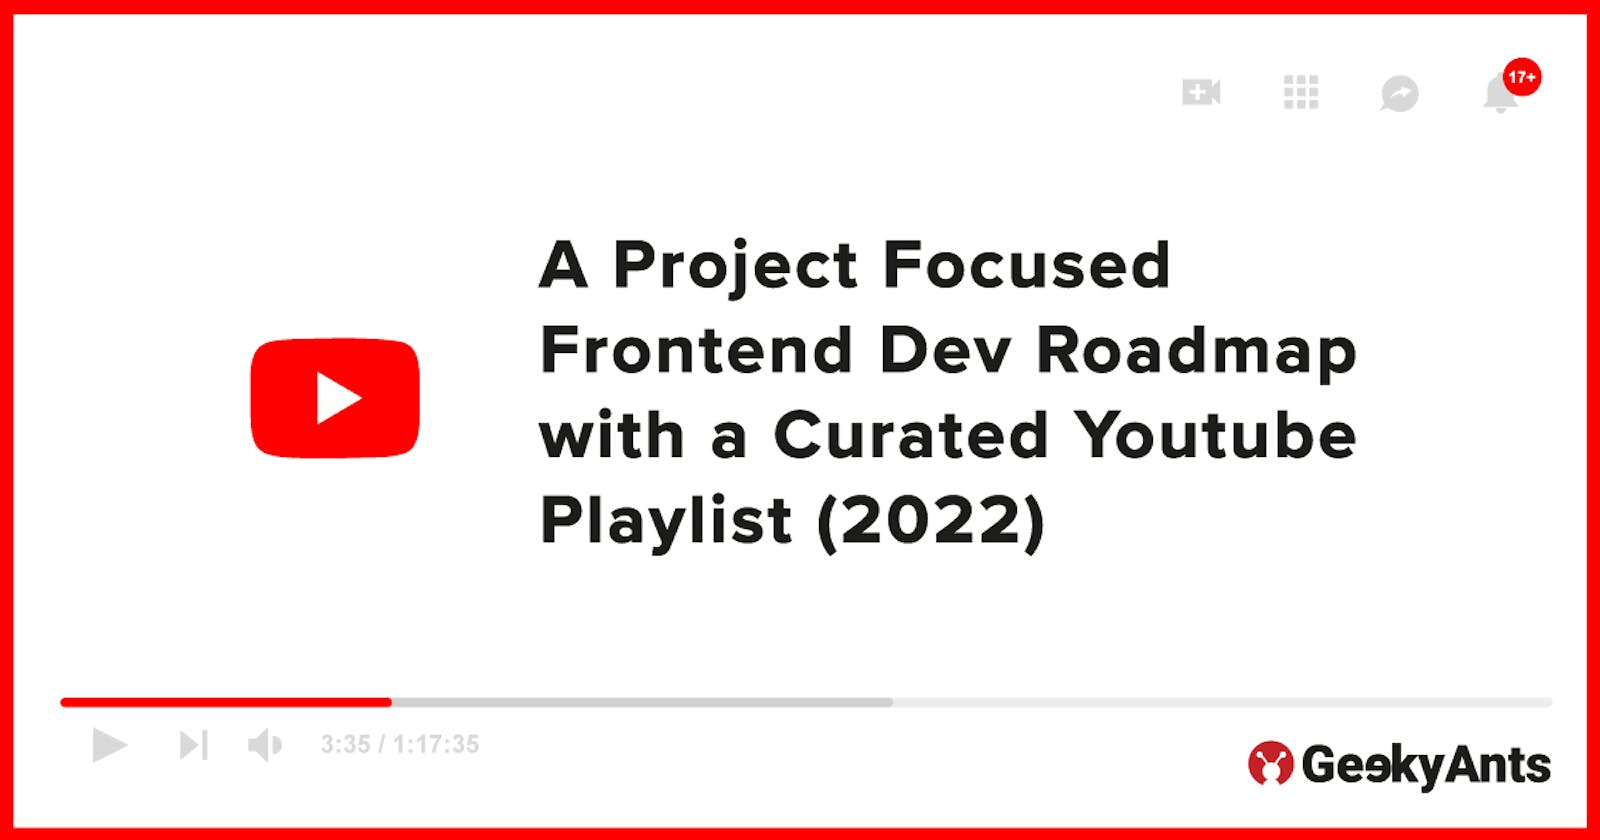 A Project Focused Frontend Dev Roadmap with a Curated Youtube Playlist (2022)